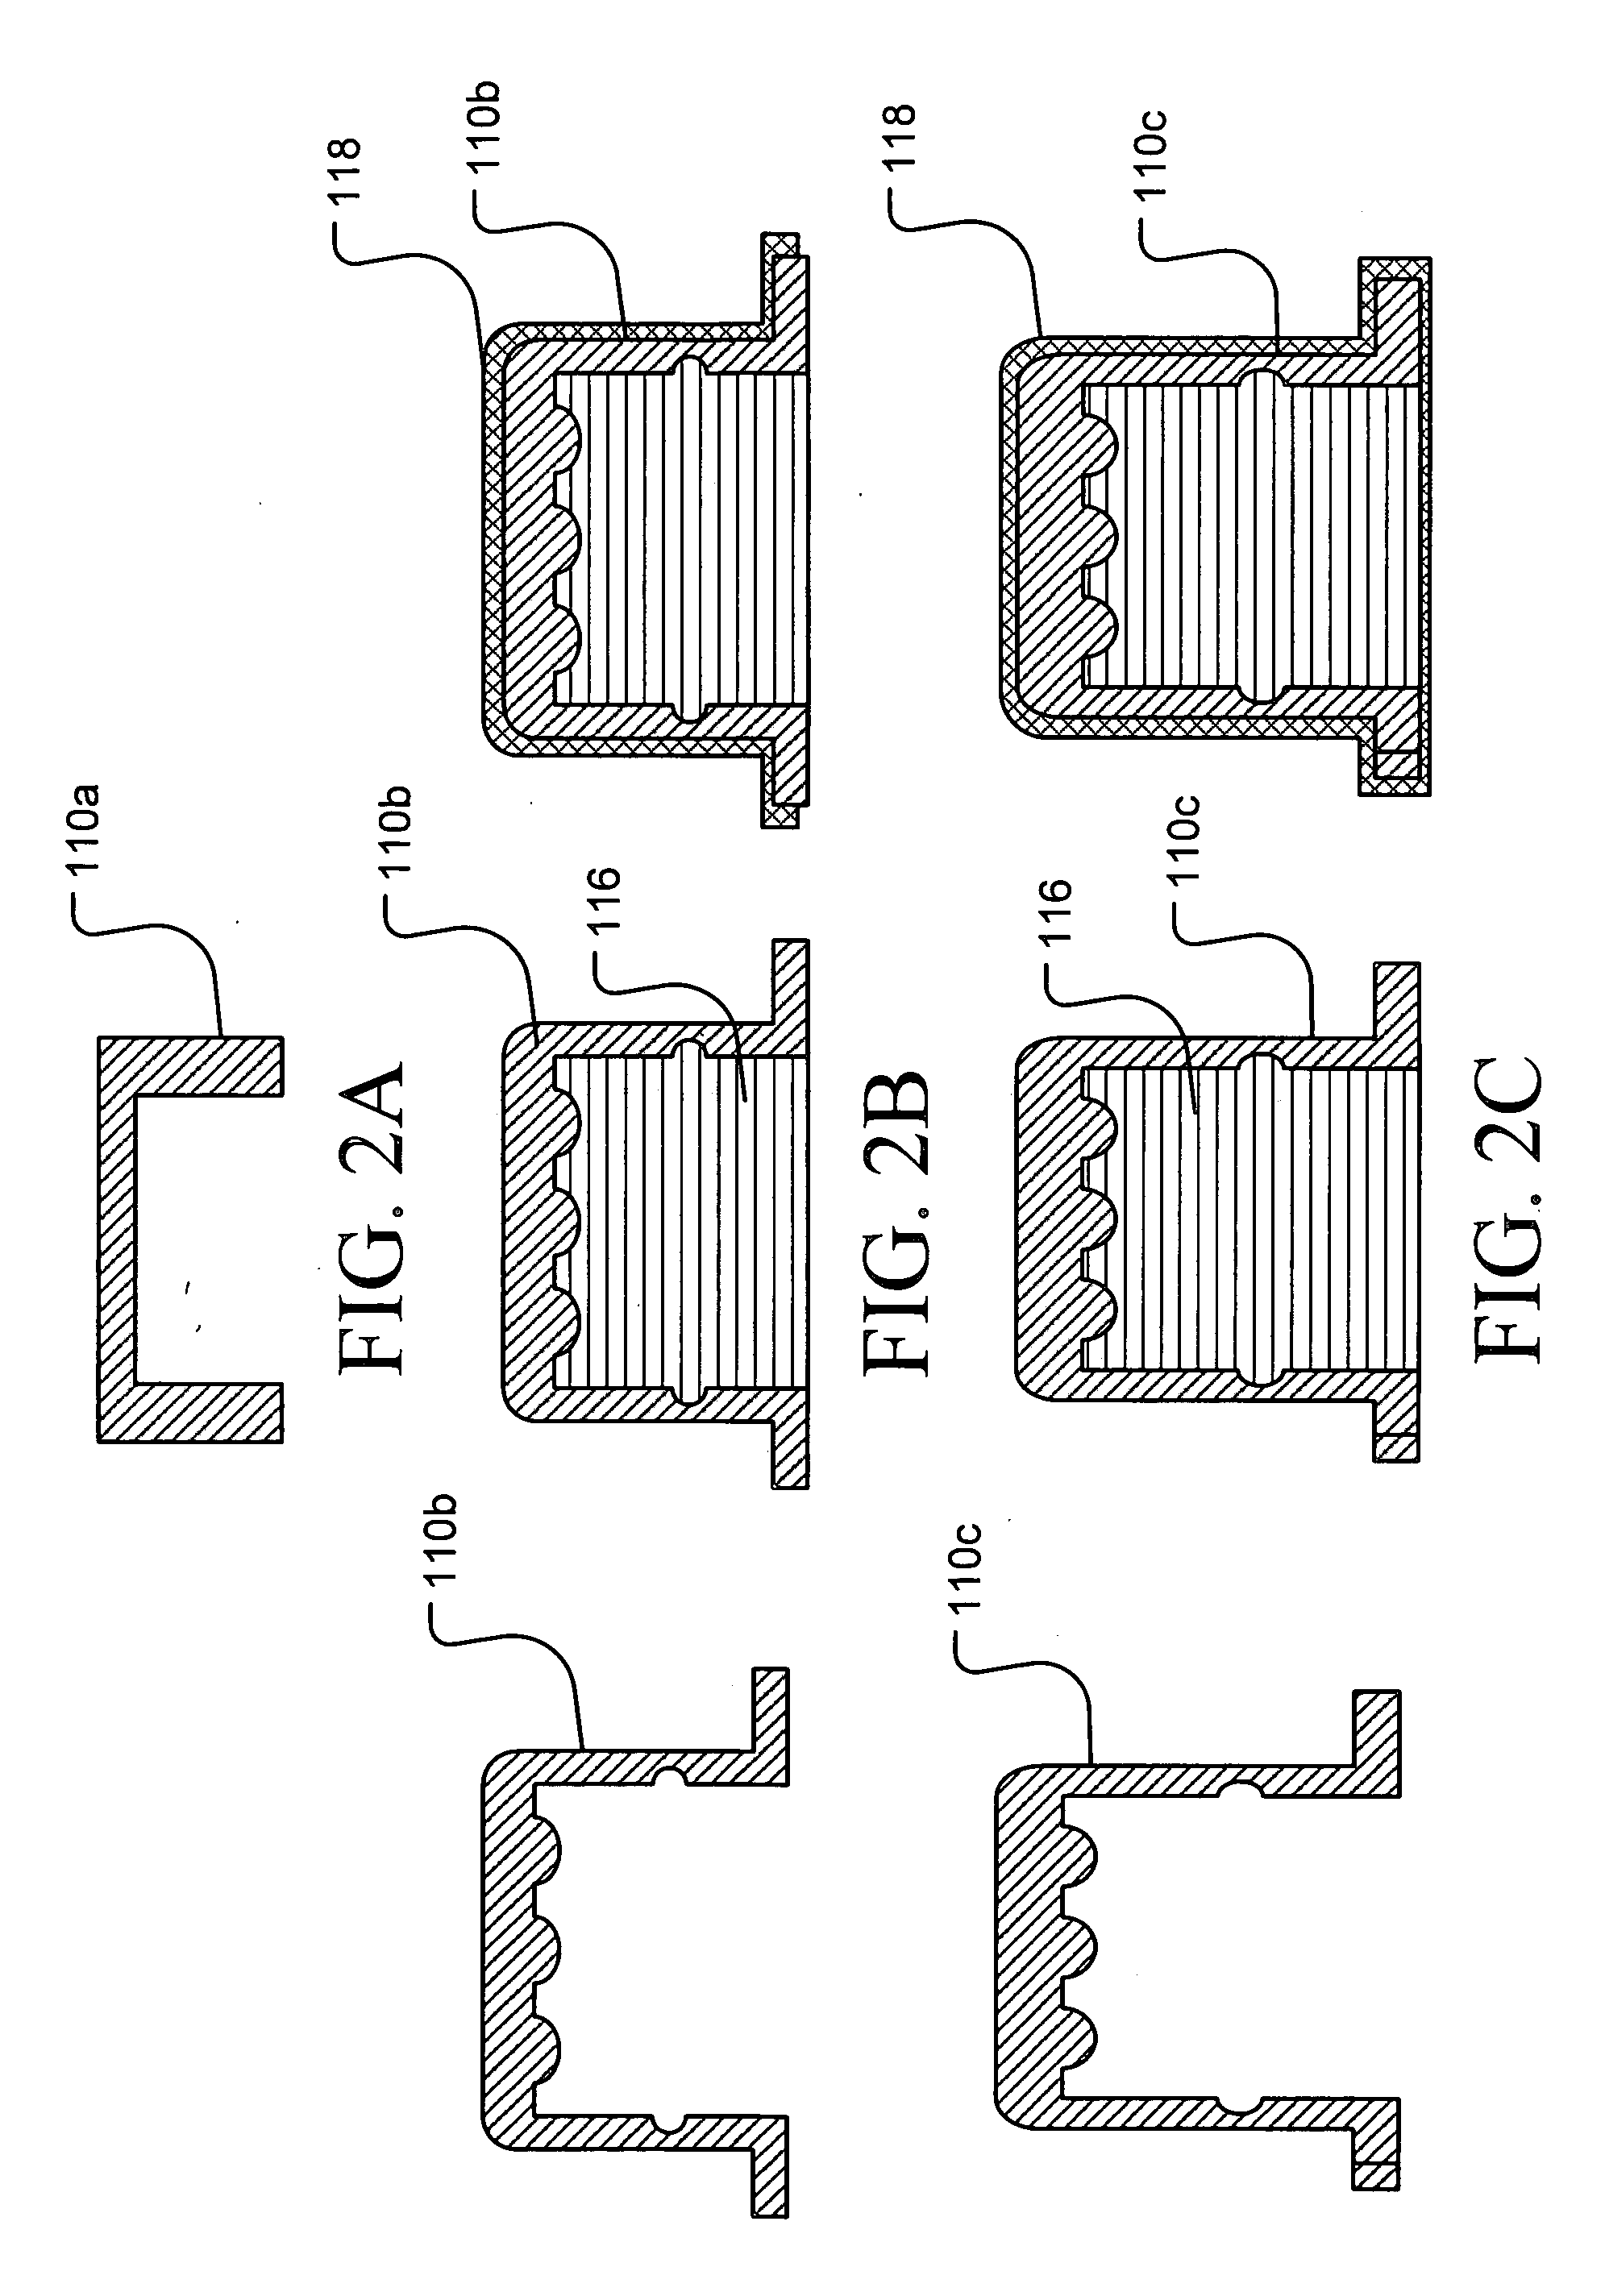 Tri-extruded WUCS glass fiber reinforced plastic composite articles and methods for making such articles